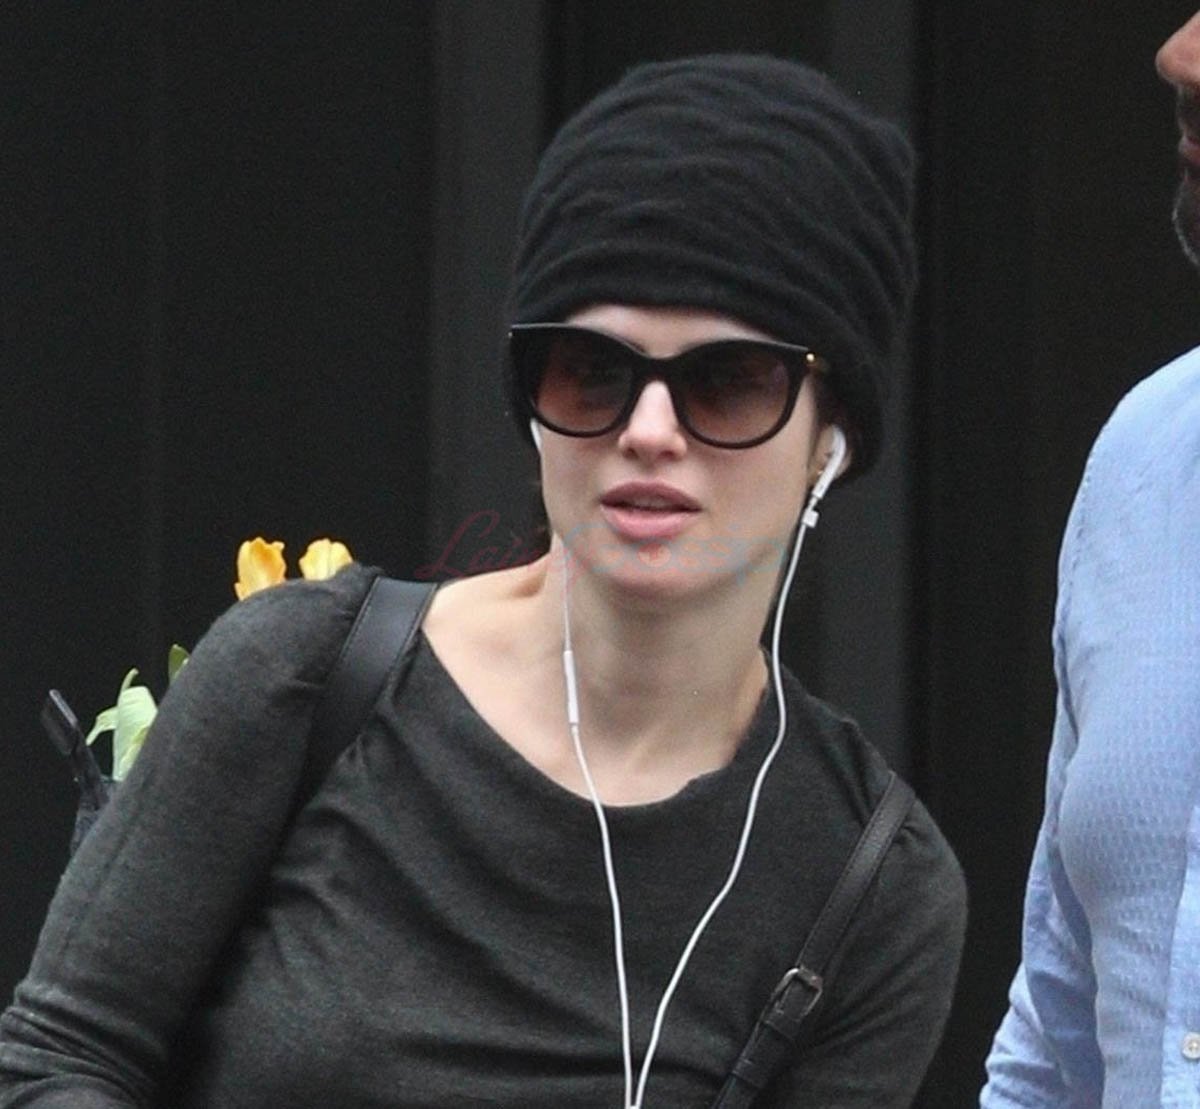 Dr Neri Oxman papped for first time since Brad Pitt relationship rumours started1200 x 1109